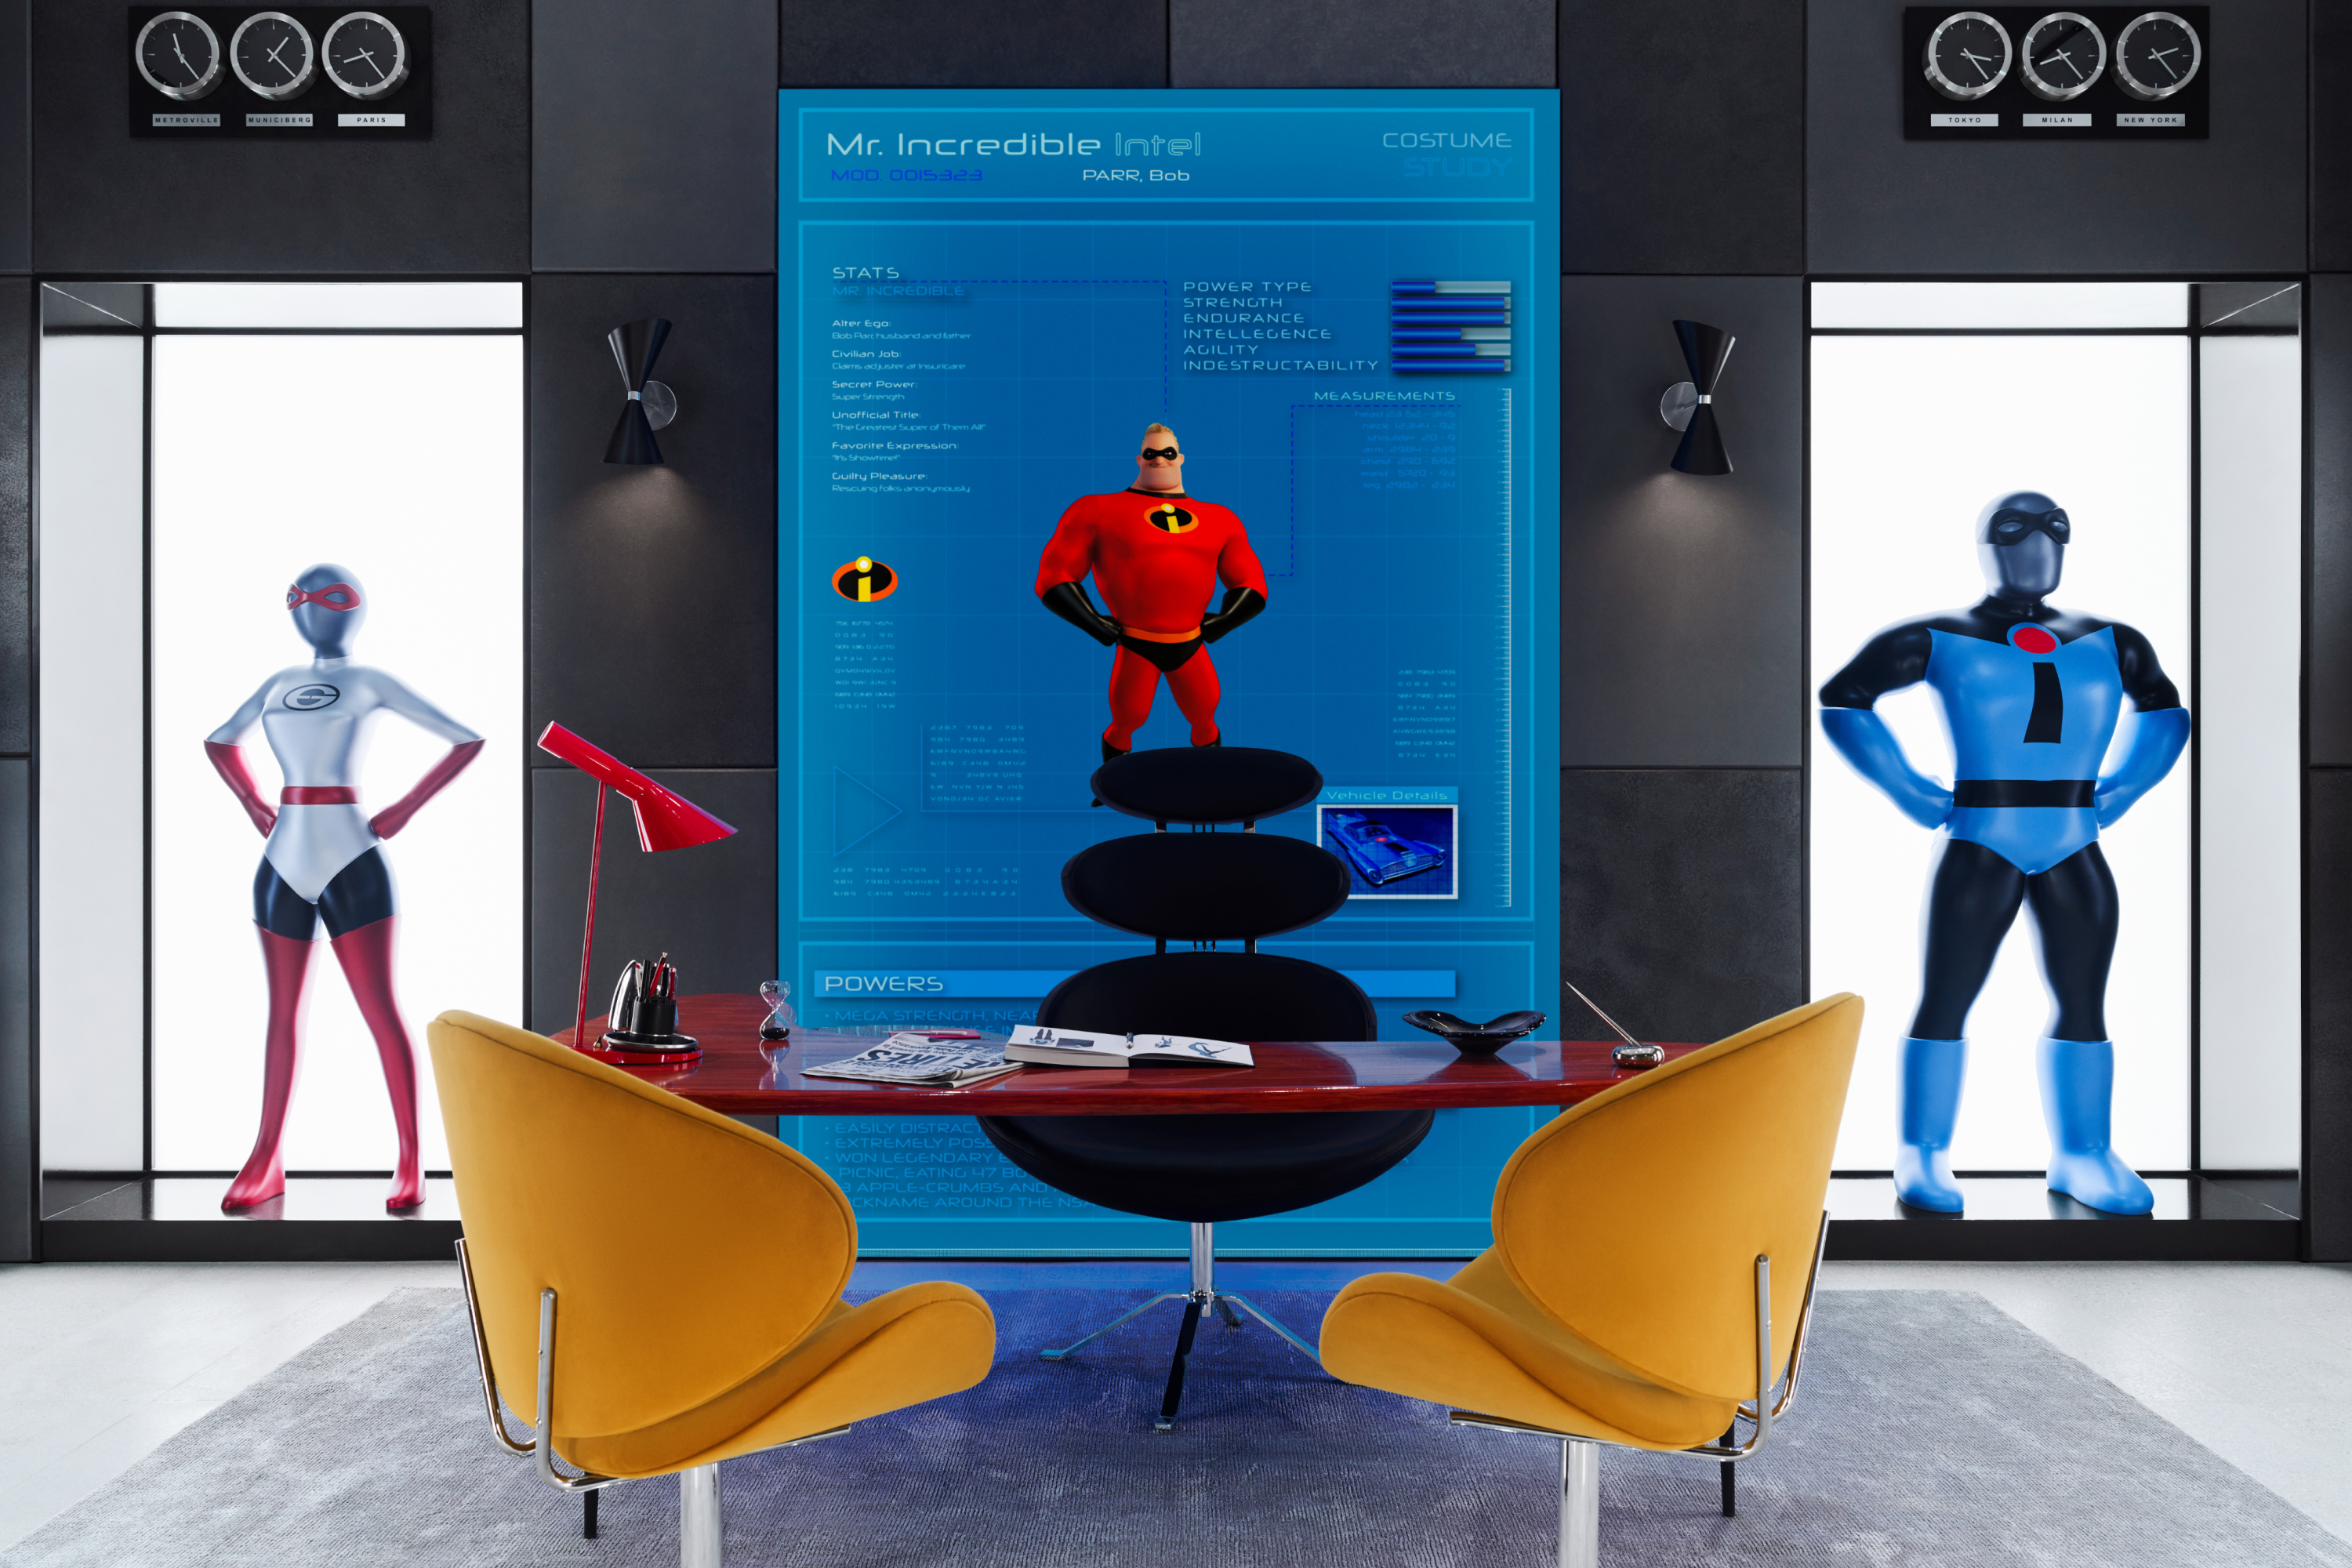 Edna Mode from Incredibles office with two display mannequins on the wall. There is a desk in the middle with the two modern yellow chairs for guests. In the background on the wall there is a large screen showing information about the suit including stats and a photo of Mr. Incredibles in his red and black suit, including his black eye mask